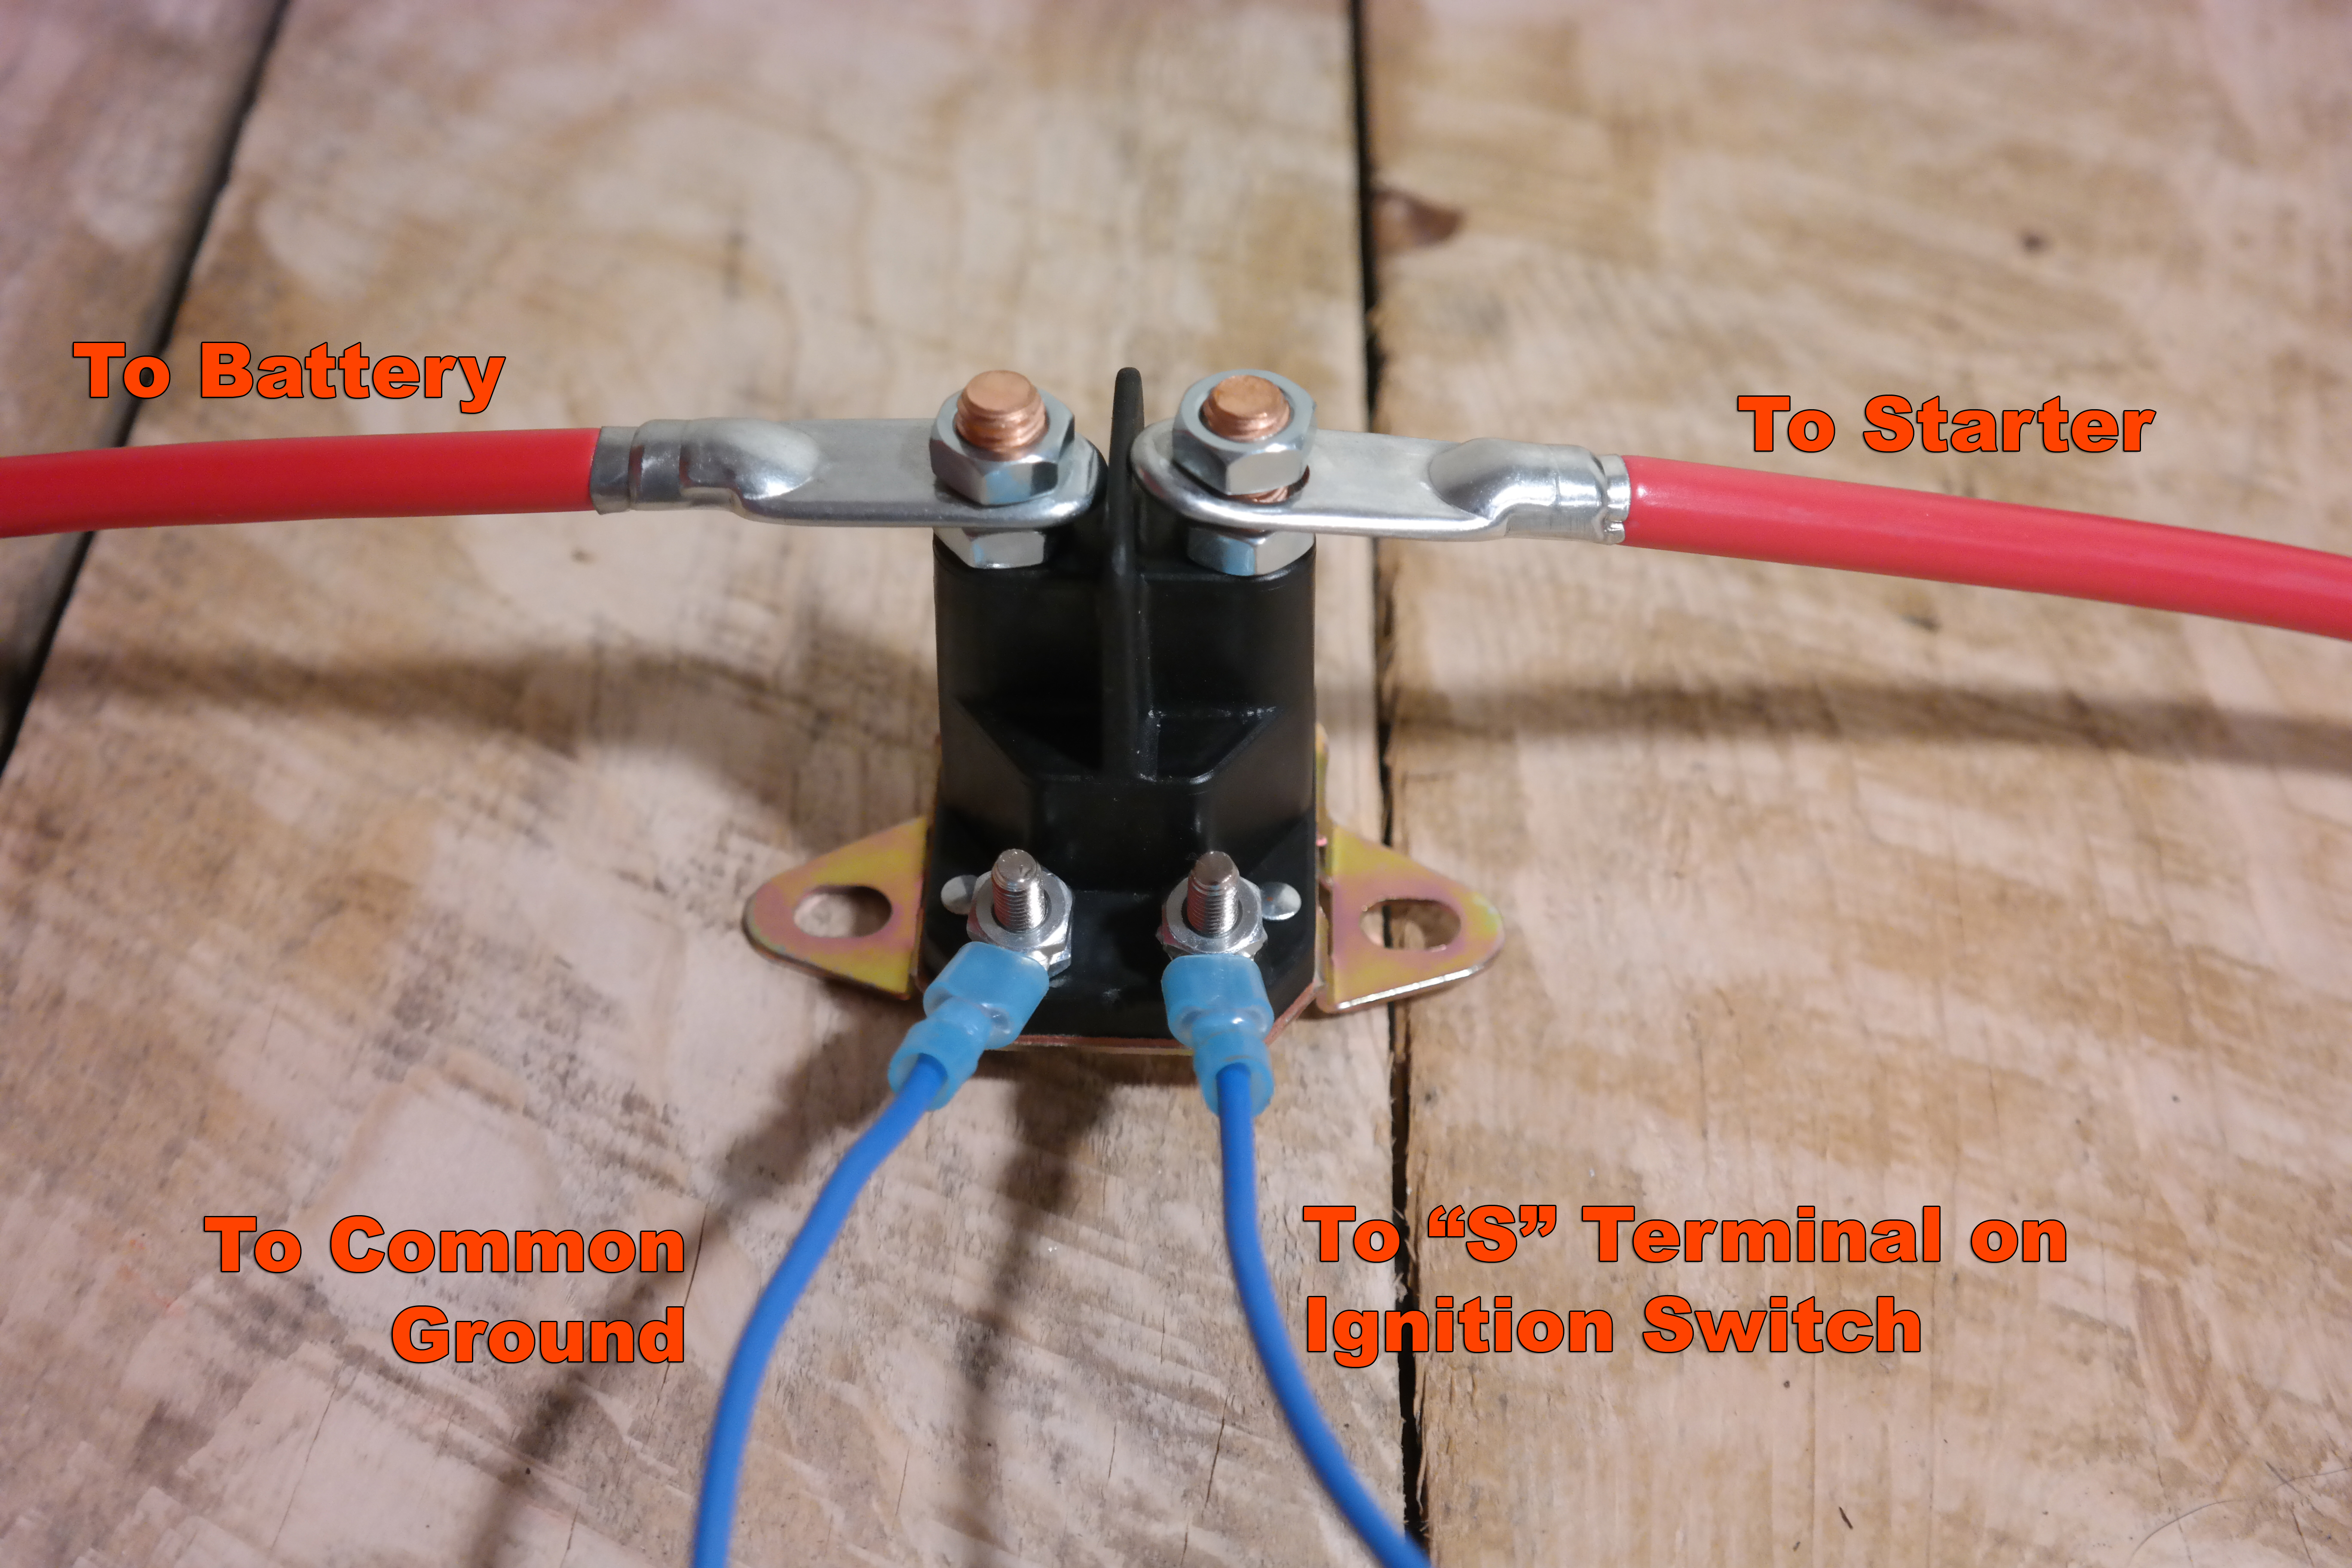 Tractor Wiring Theory Isavetractors, Wiring Diagram For Starter Solenoid On Lawn Mower